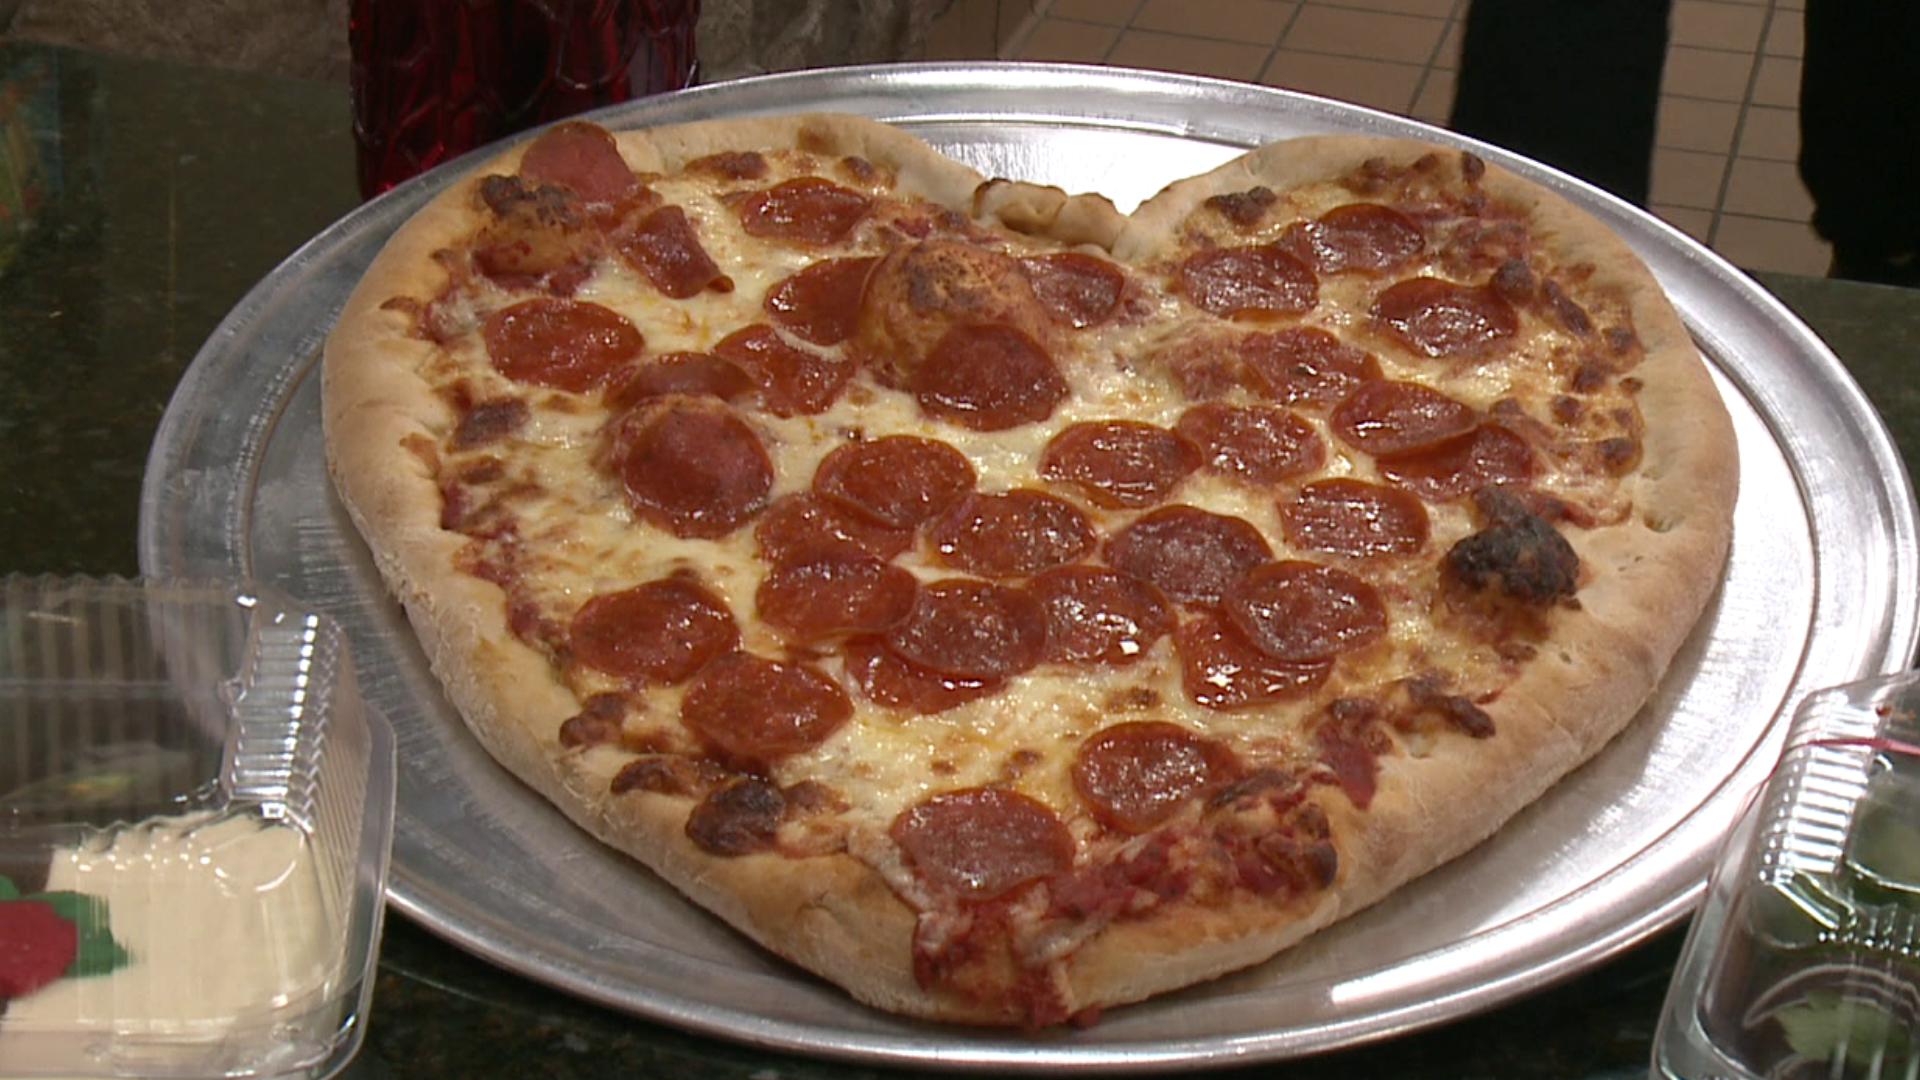 If you're looking for a cheesy way to celebrate Valentine's Day, why not try a pizza?